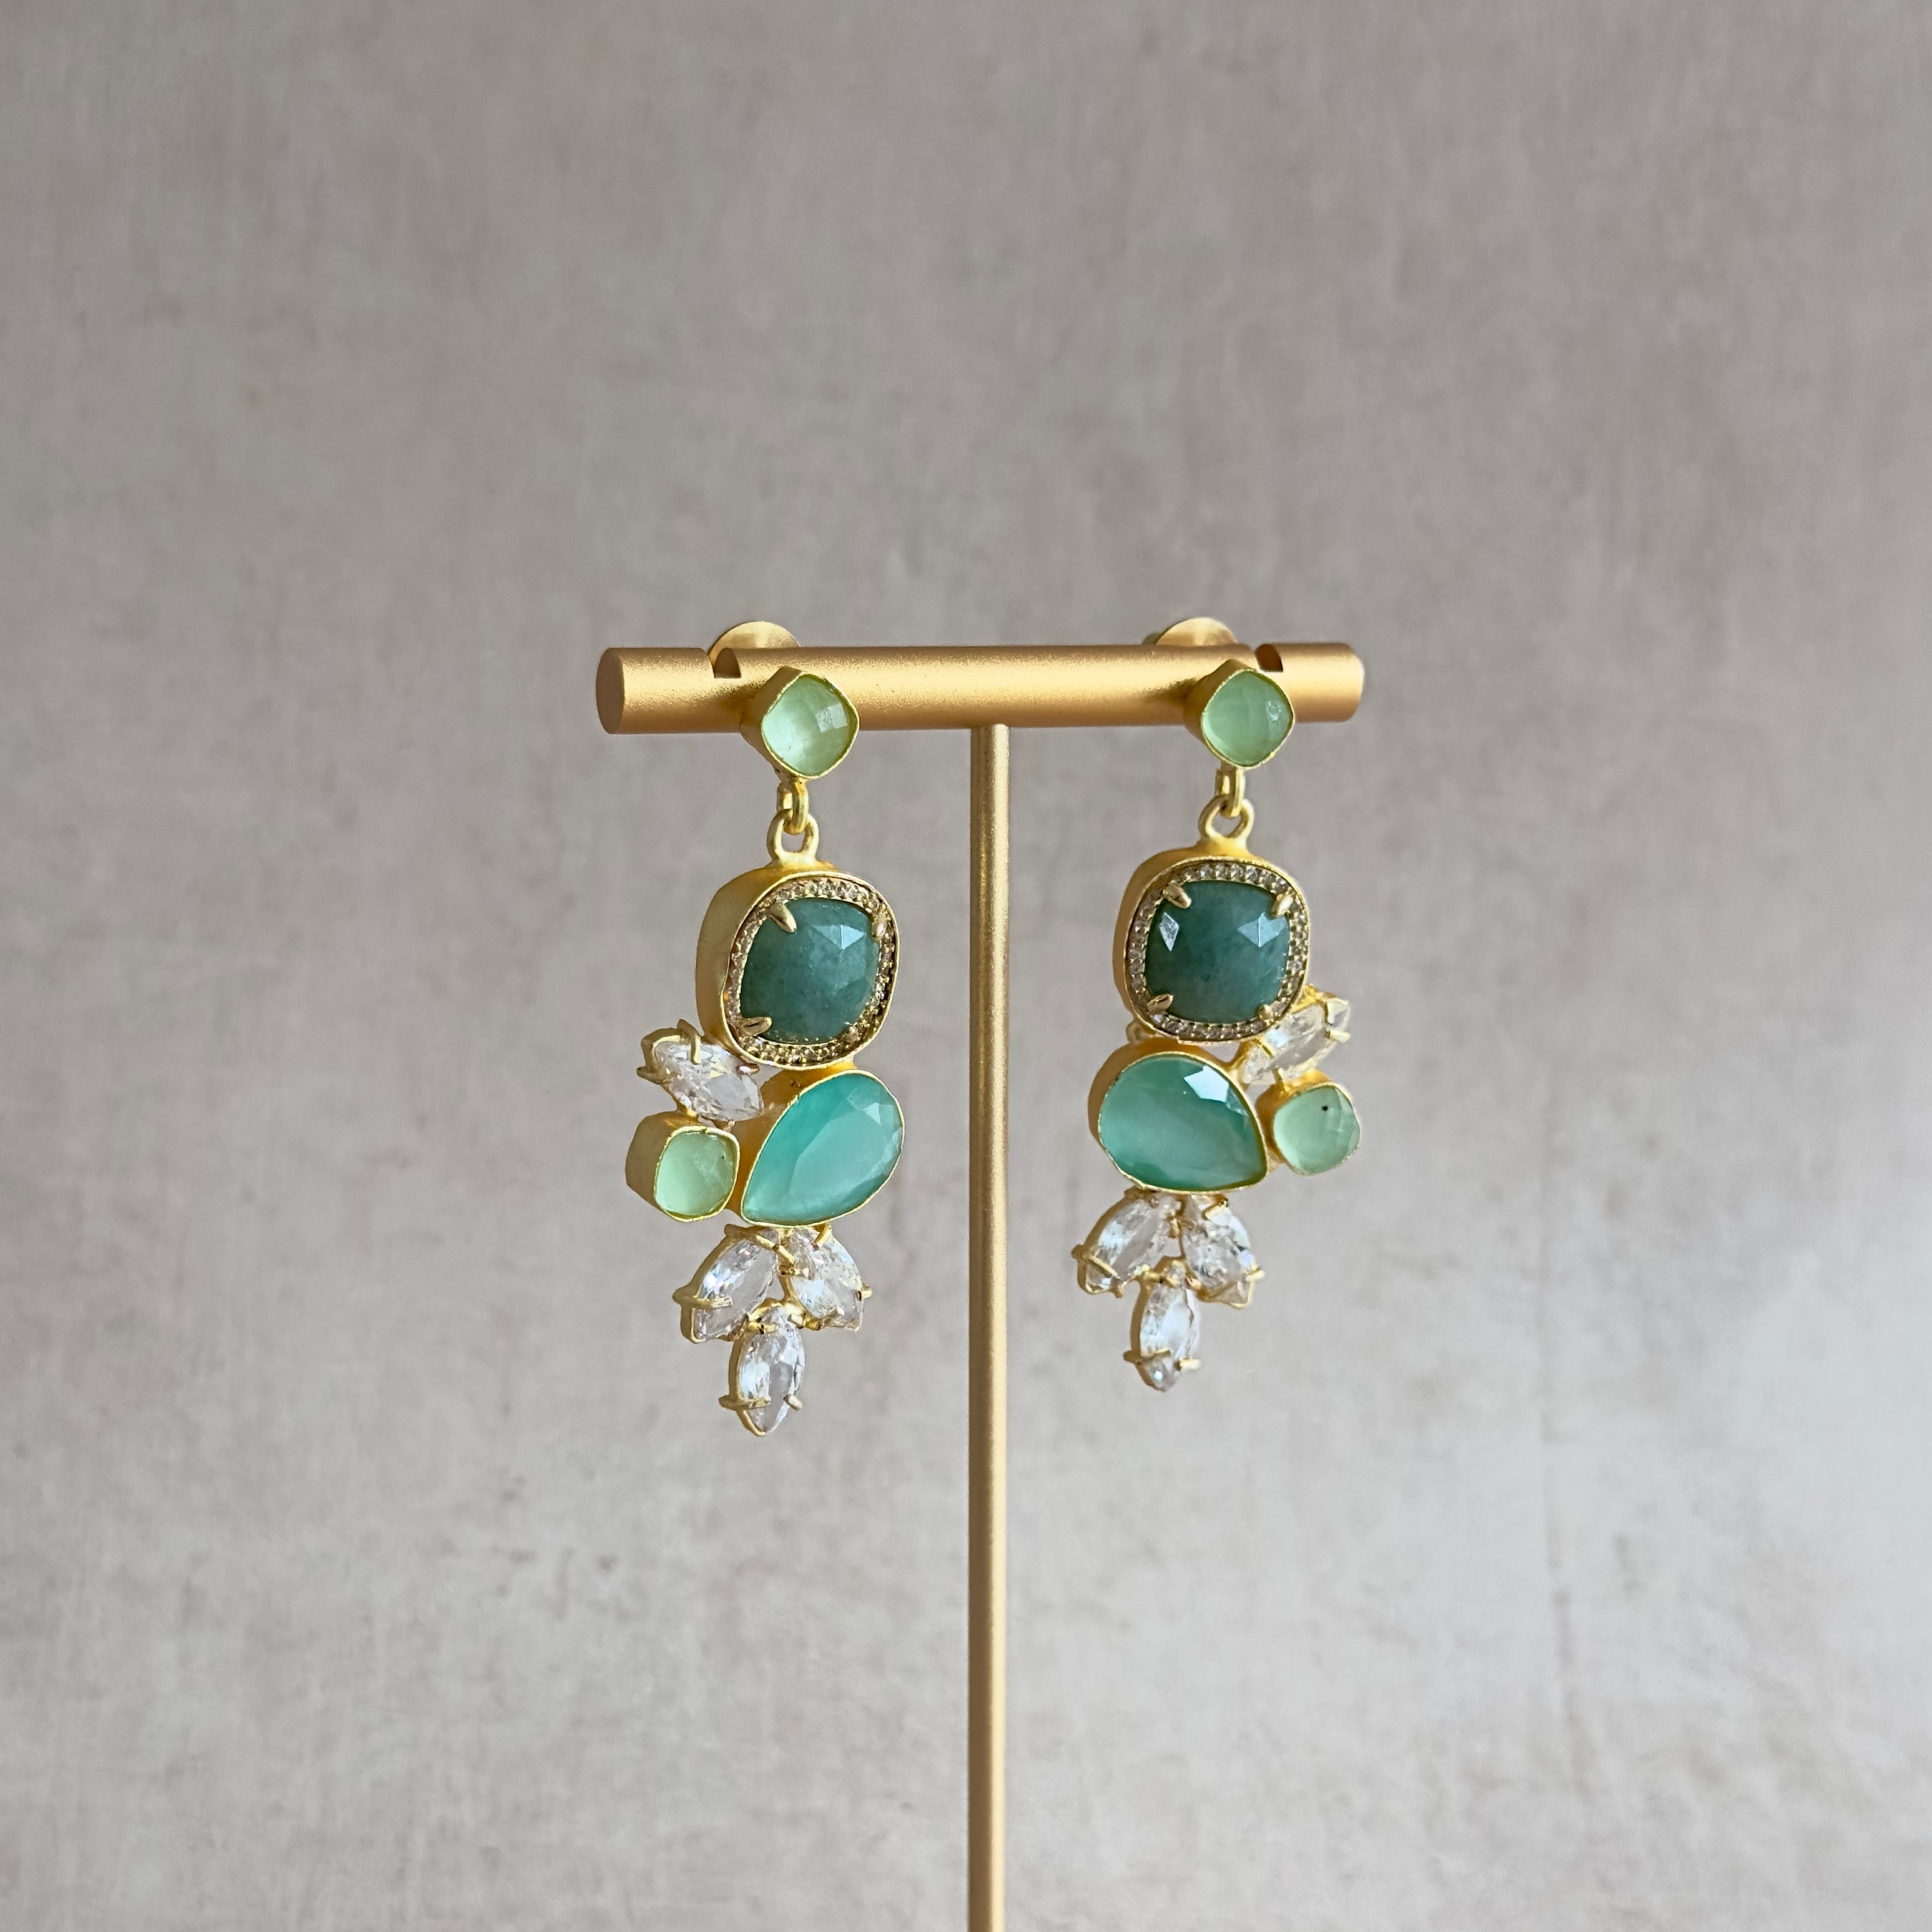 Indulge in the captivating tones of the Malika Mint Drop Earrings. The stunning hues of green, accented with sparkling CZ crystals, will add a touch of elegance to any outfit. Elevate your style and feel radiant with these gorgeous earrings.